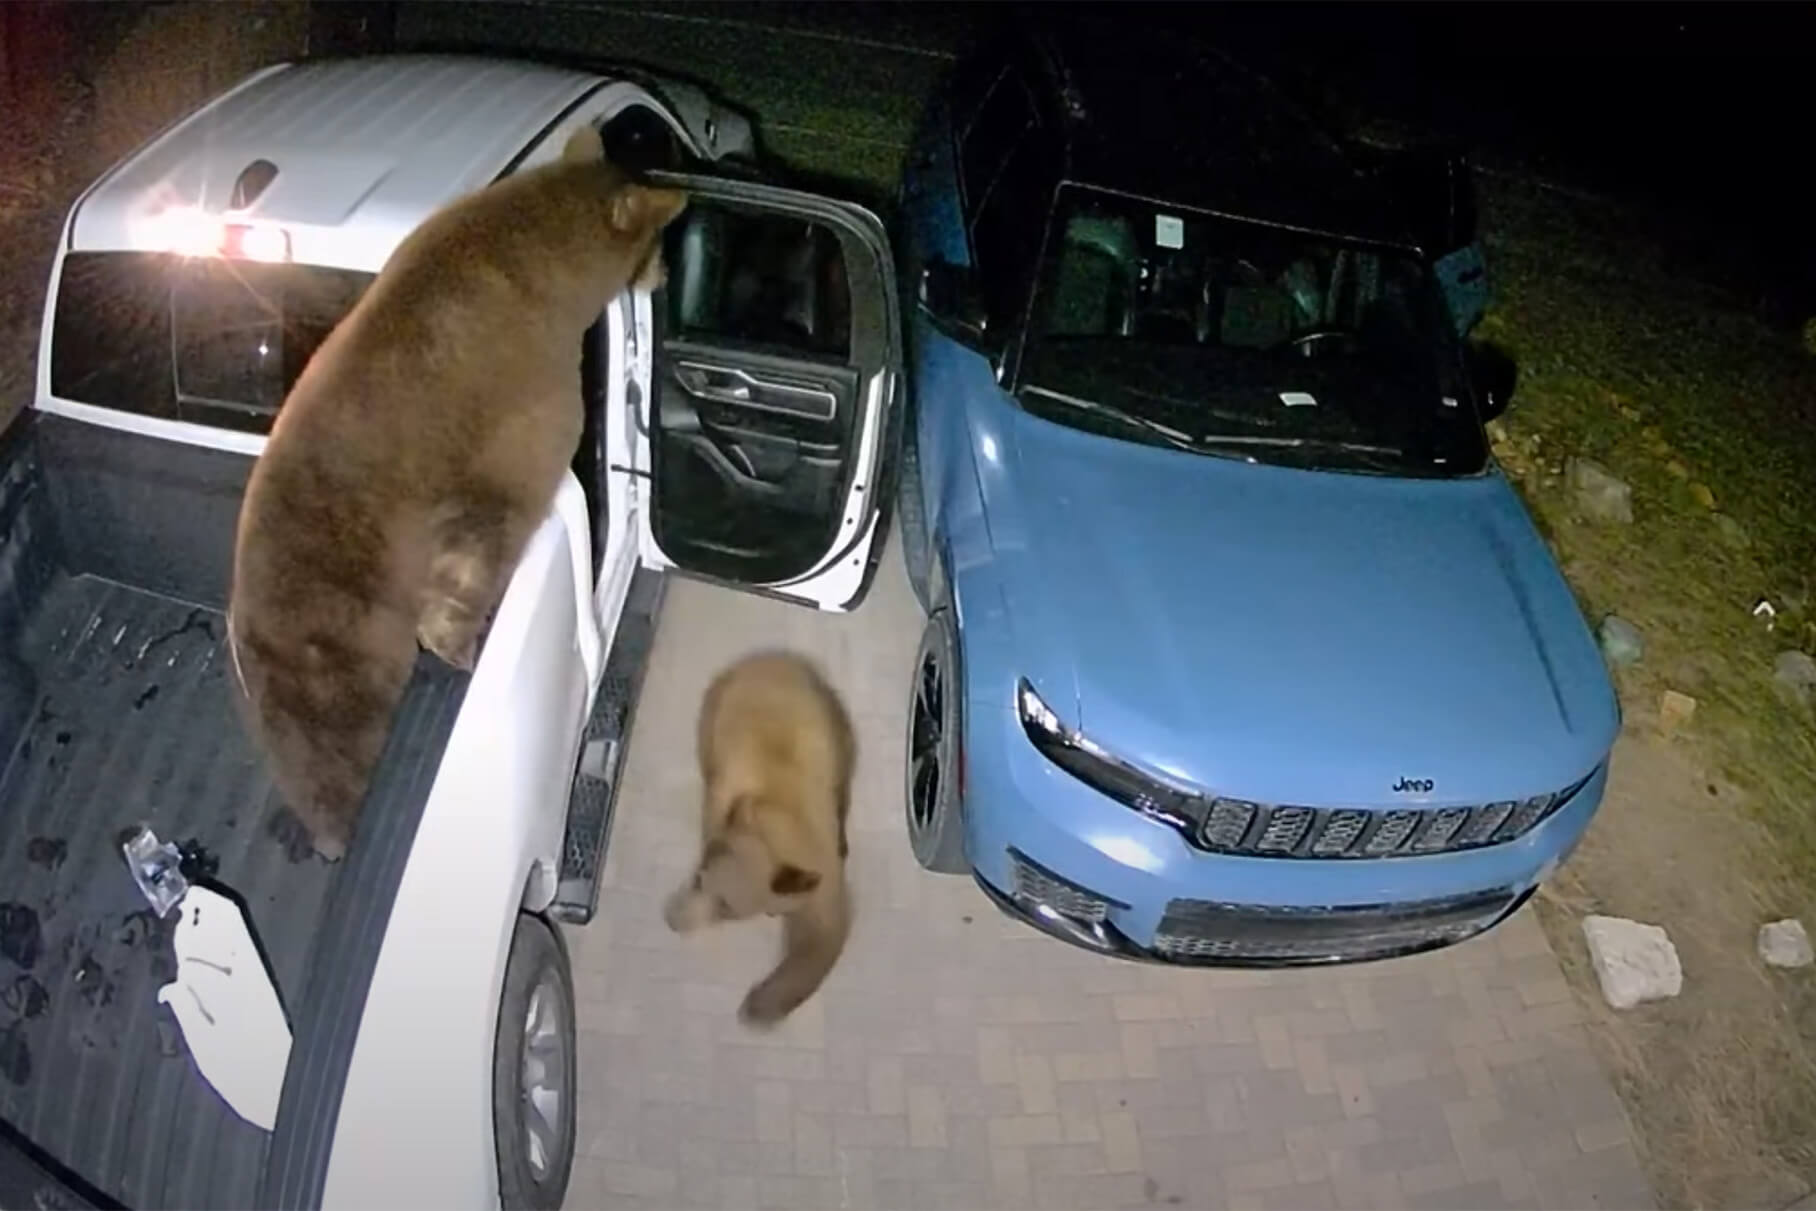 The bears easily opened the doors of two parked cars